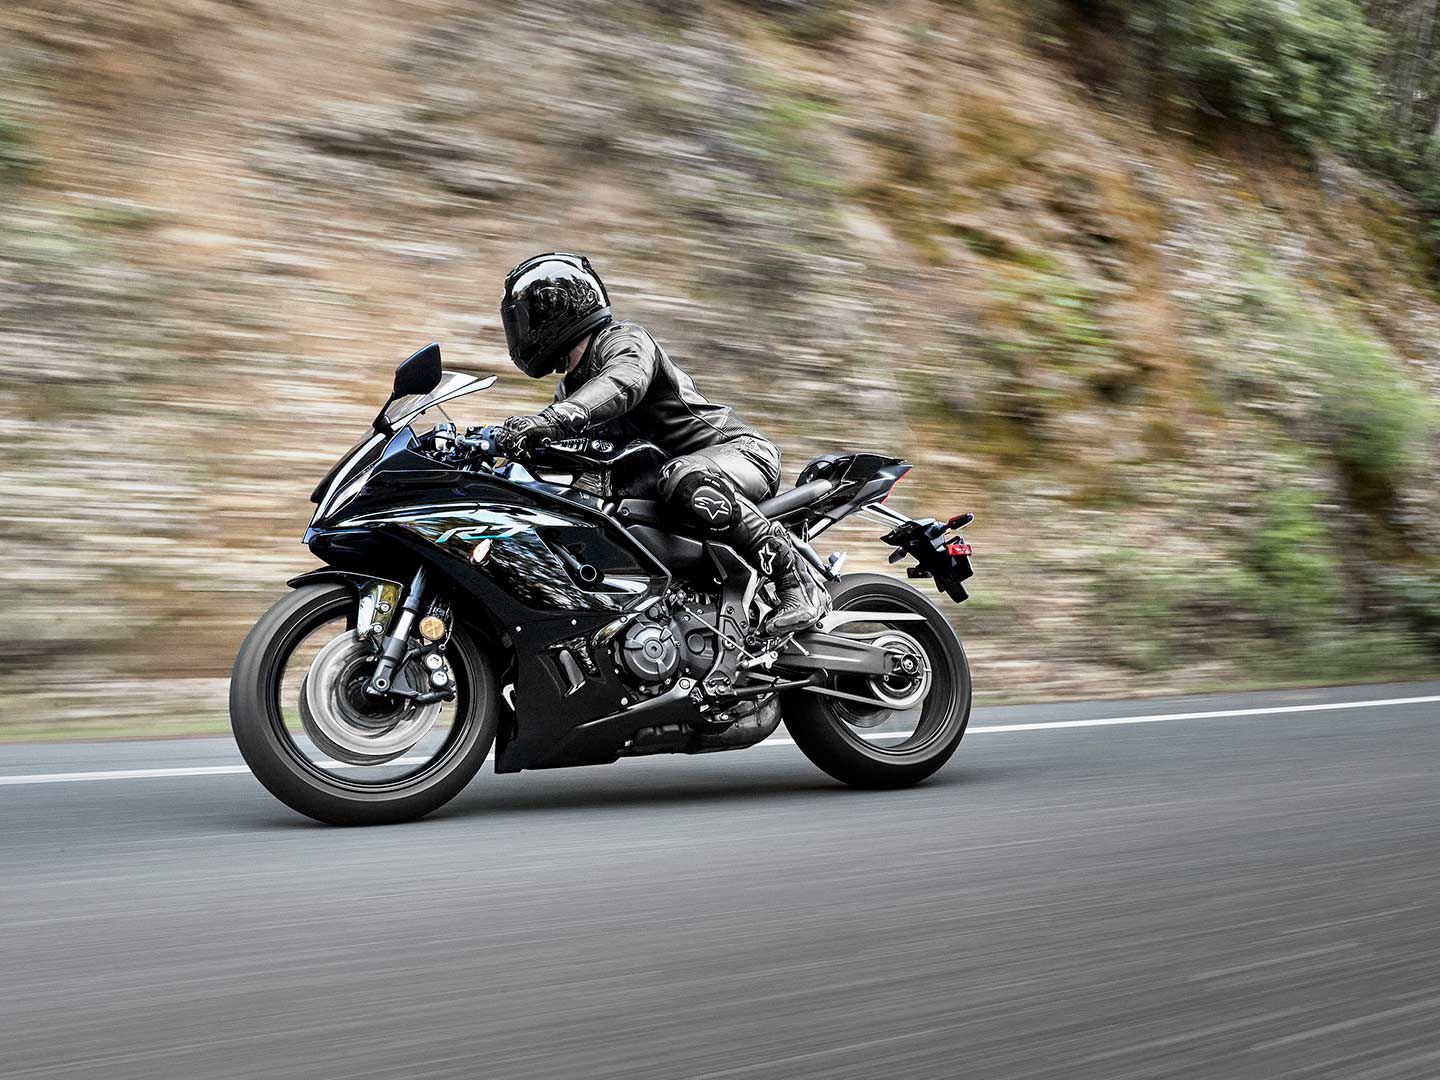 For a versatile, approachable, fun sportbike look no further than the Yamaha YZF-R7.